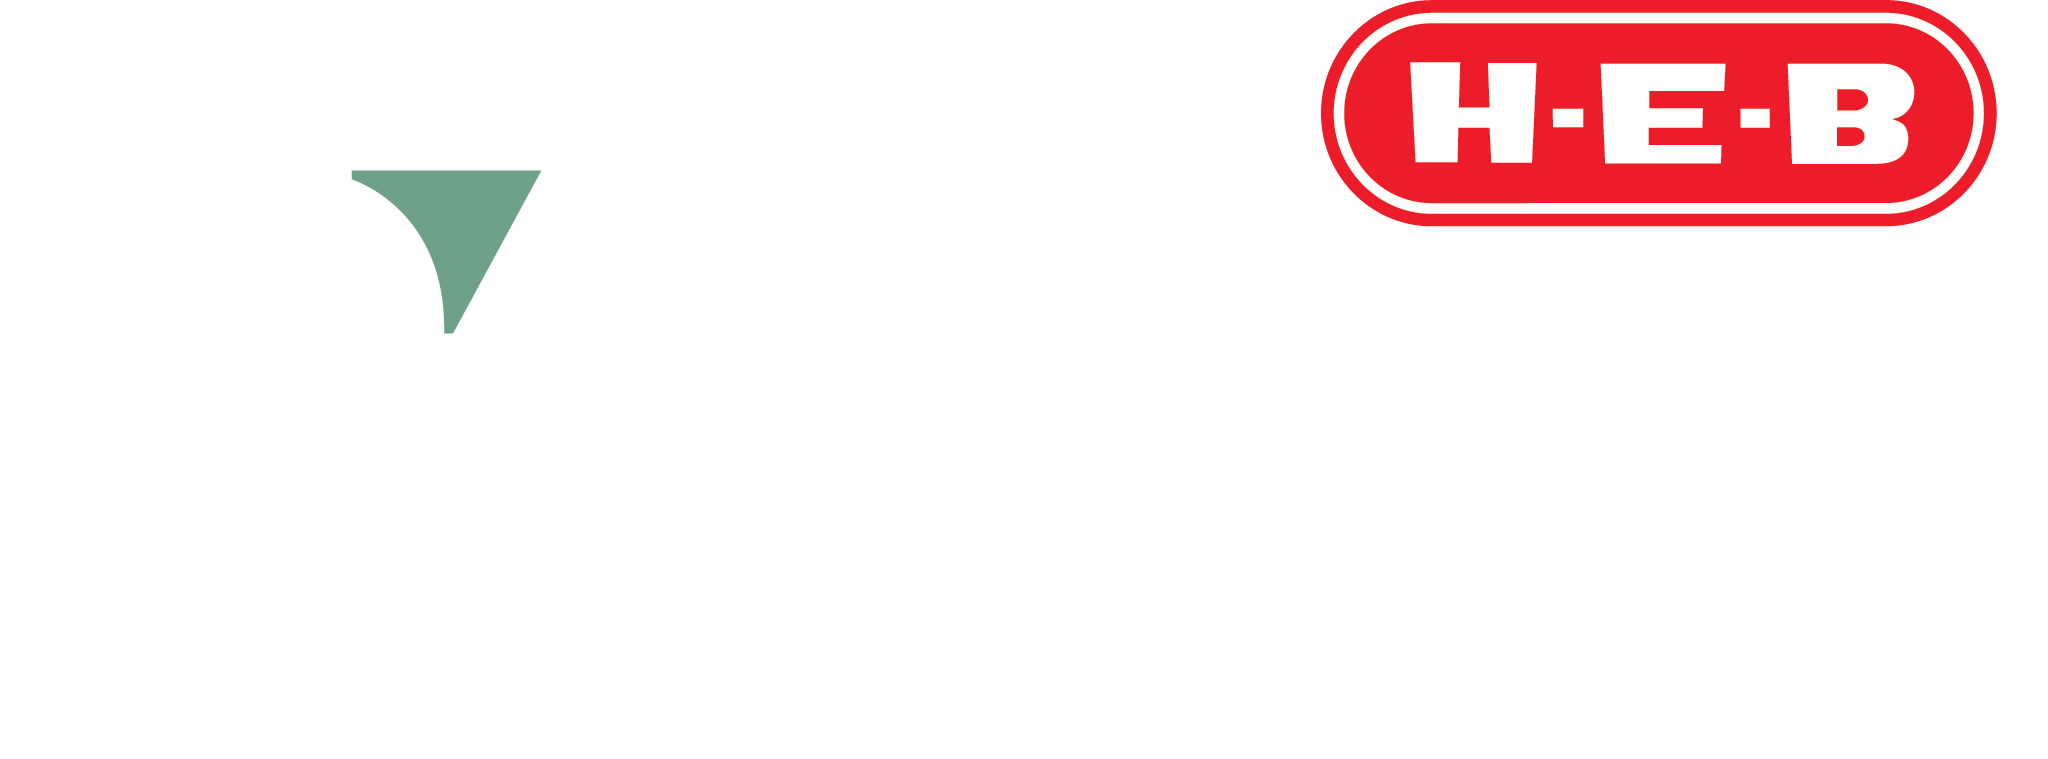 HEB Wellness Nutrition Services